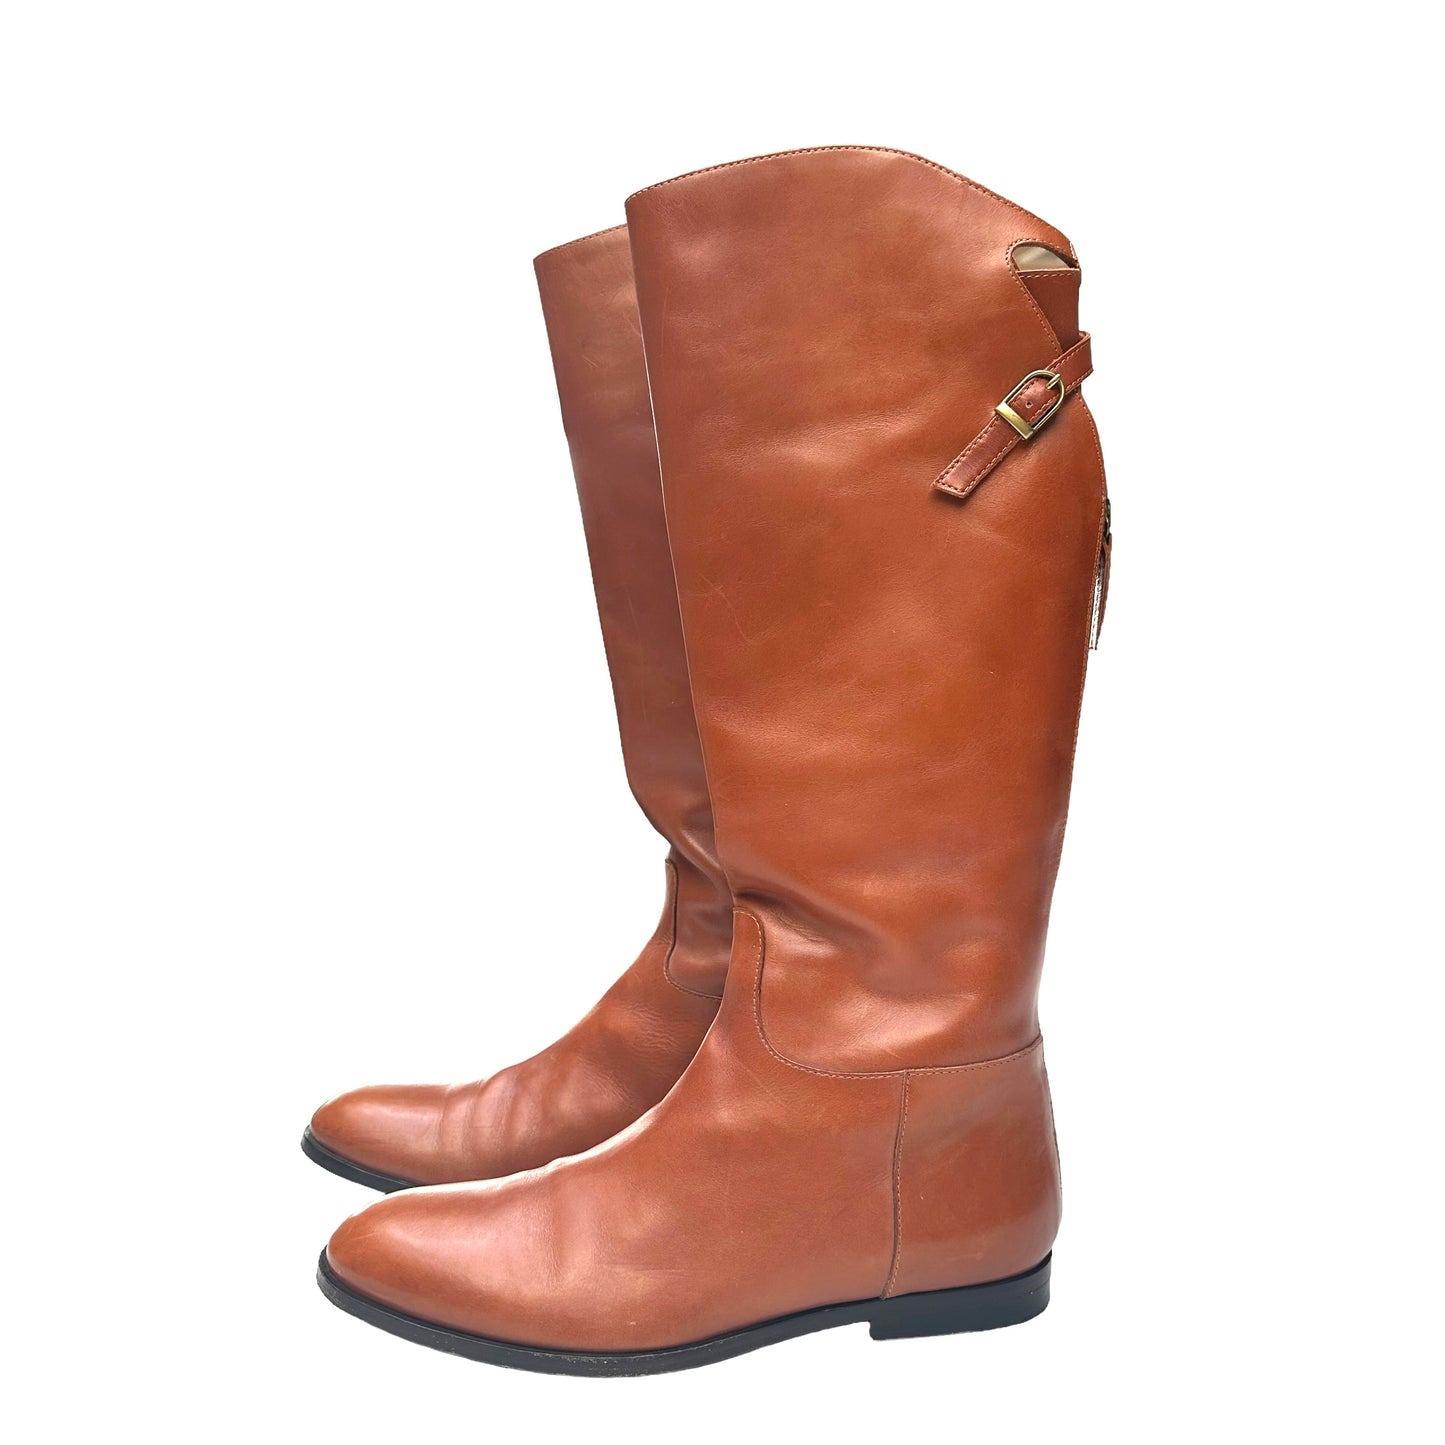 Brown Riding Boots - 8